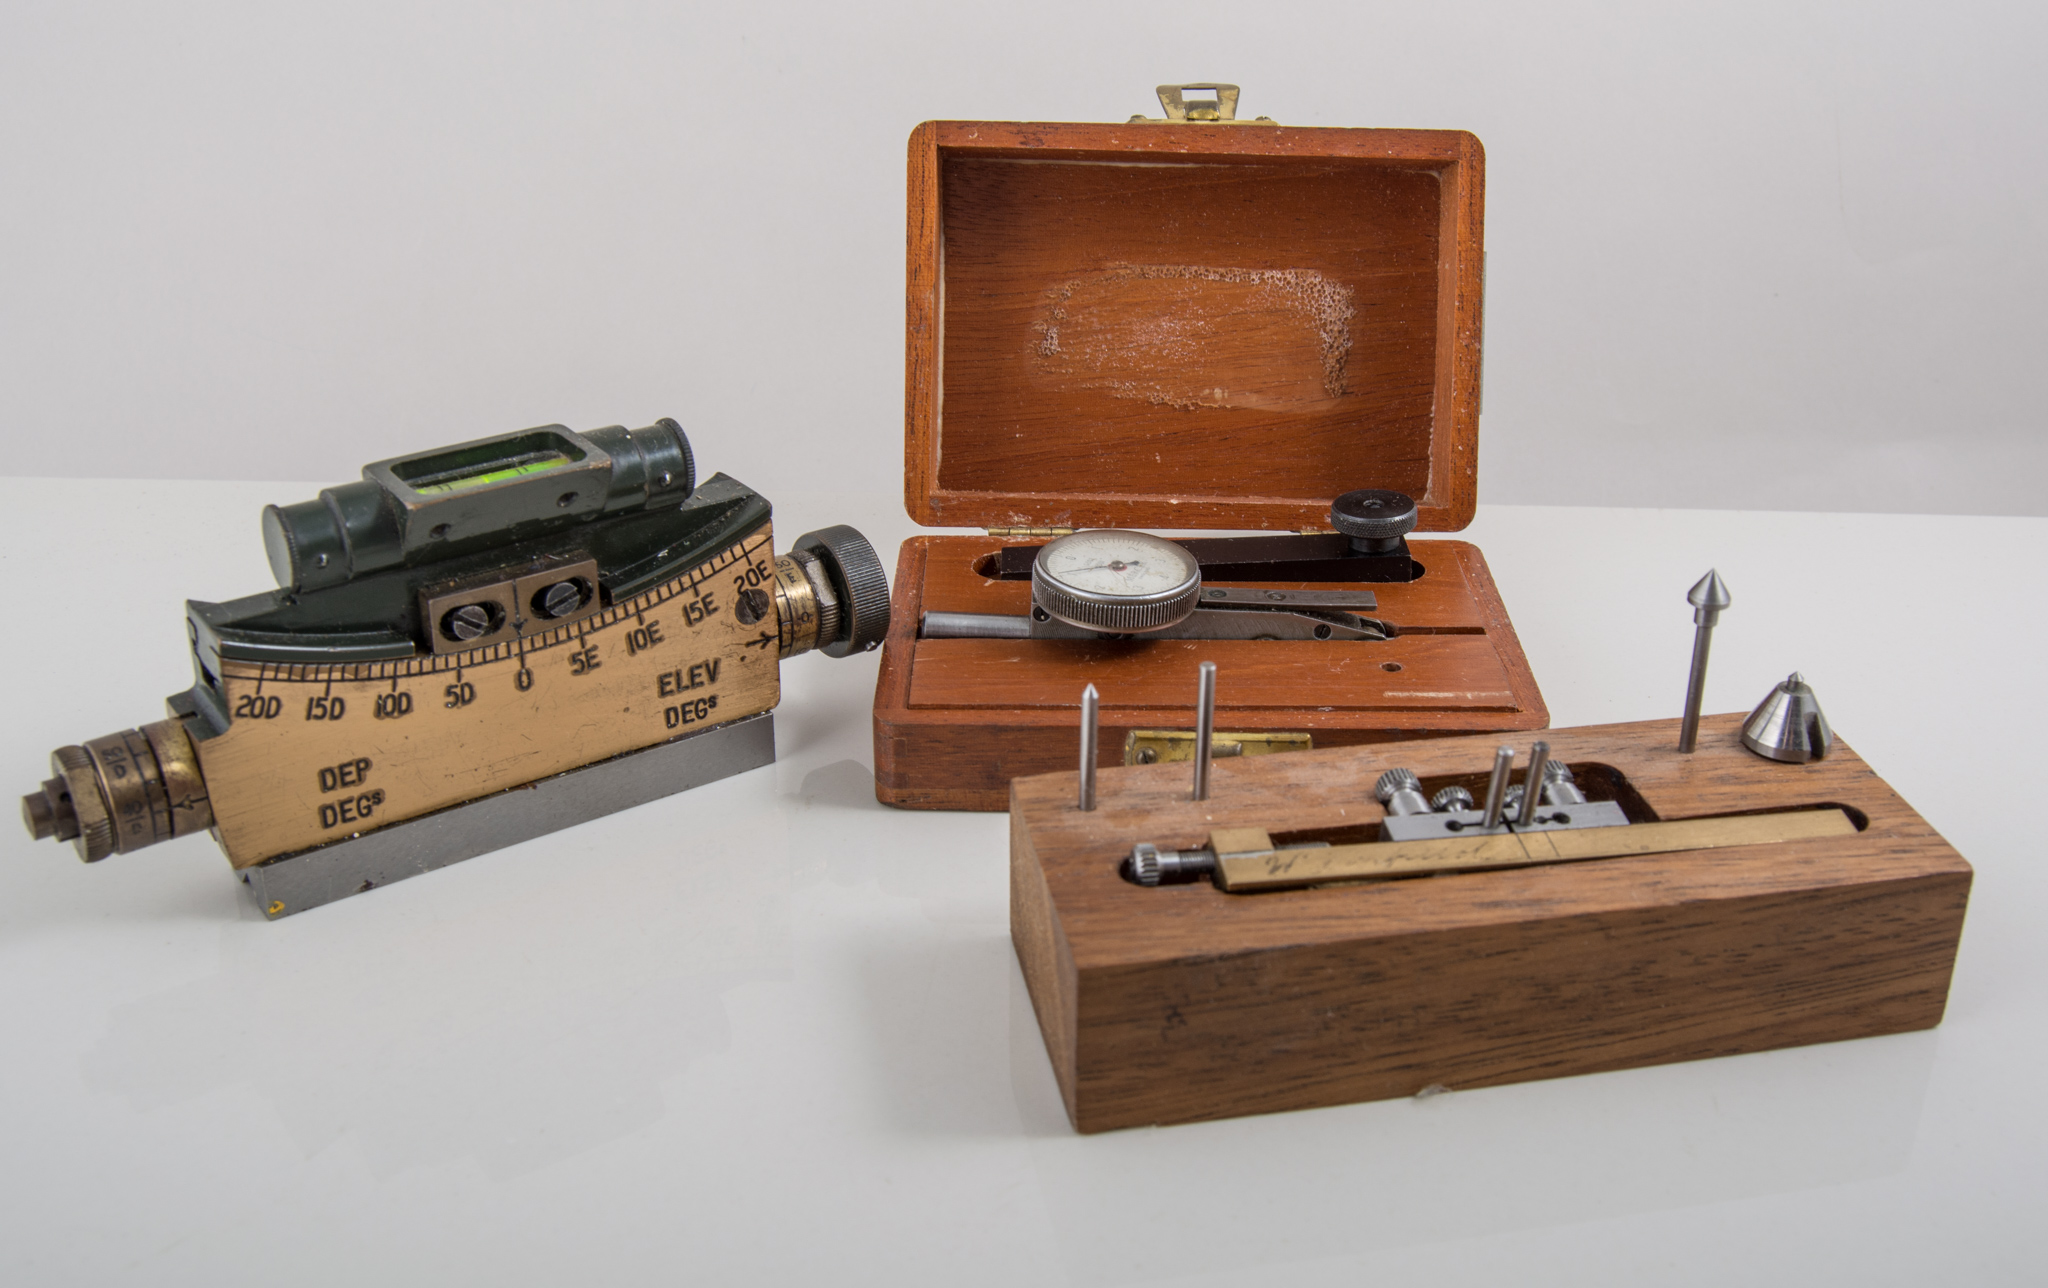 Storeage box with two drawers containing DTI MILOMETER and LEVEL gauge plus steel stock.